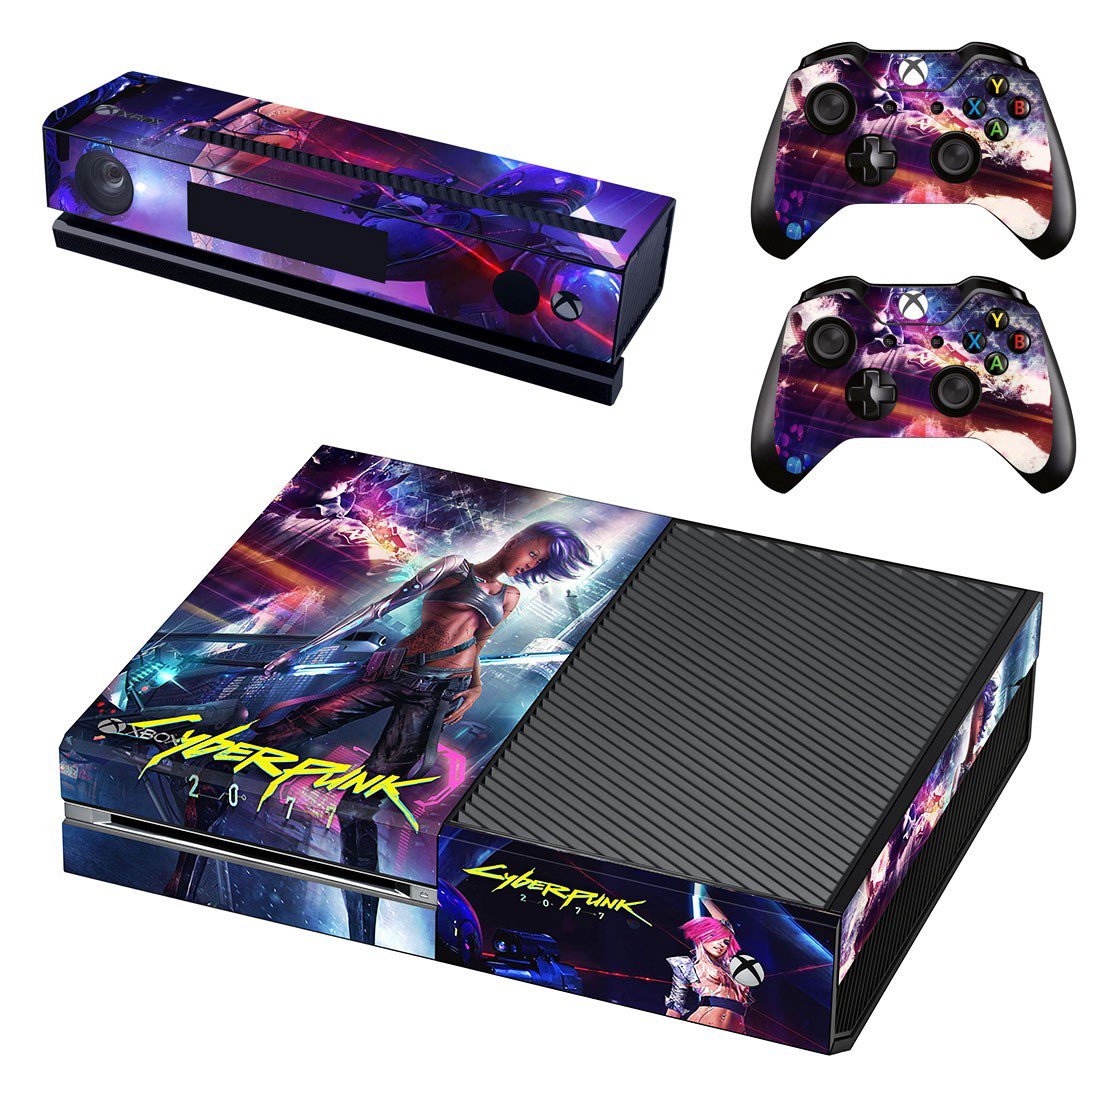 Xbox One And Controllers Skin Cover Cyberpunk 2077 Design 2